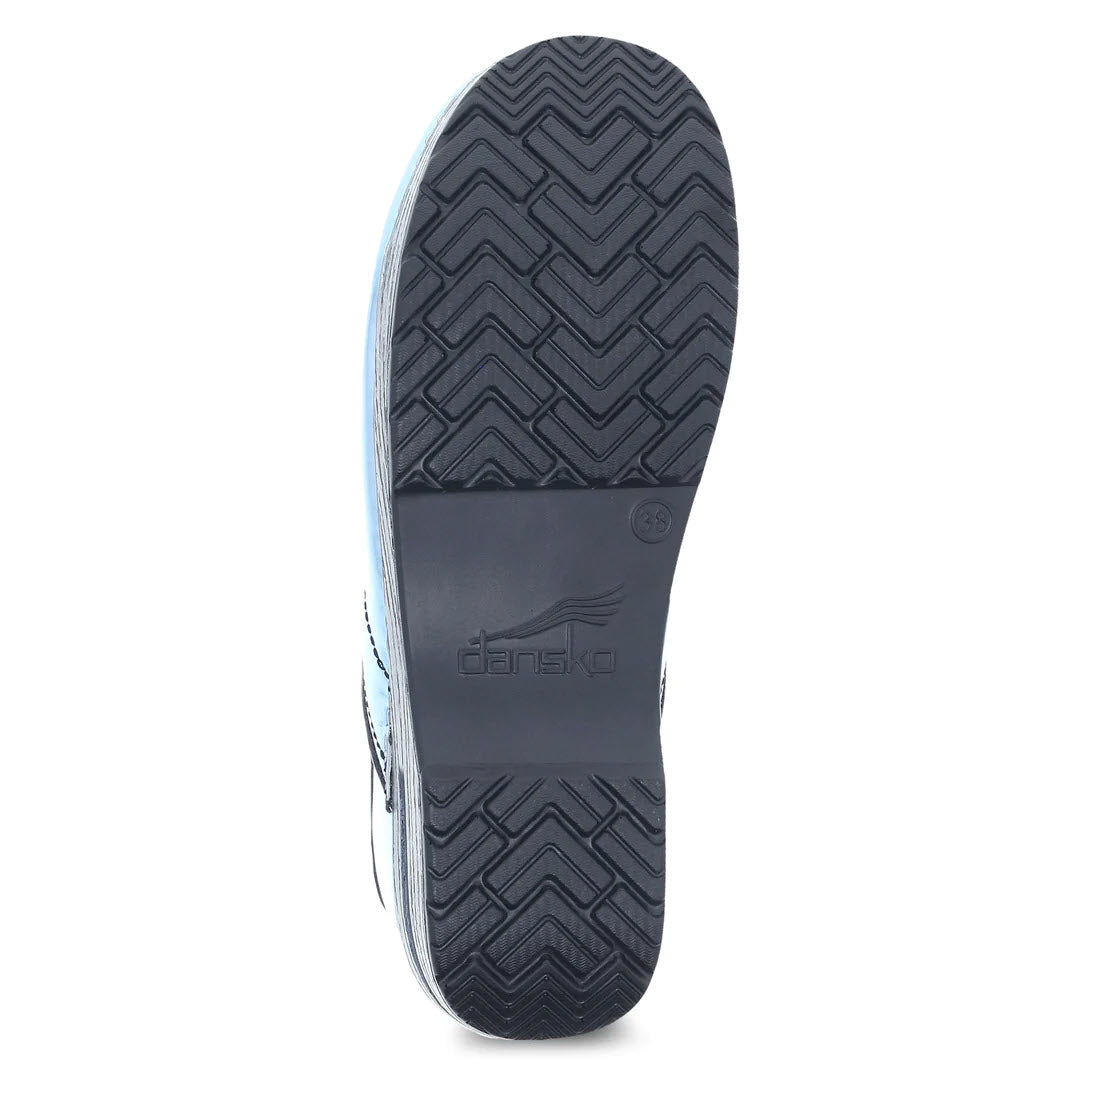 A sole view of the Dansko Prof Sky Chrome Metallic clog featuring a zigzag tread pattern and the Dansko brand logo embossed at the center.